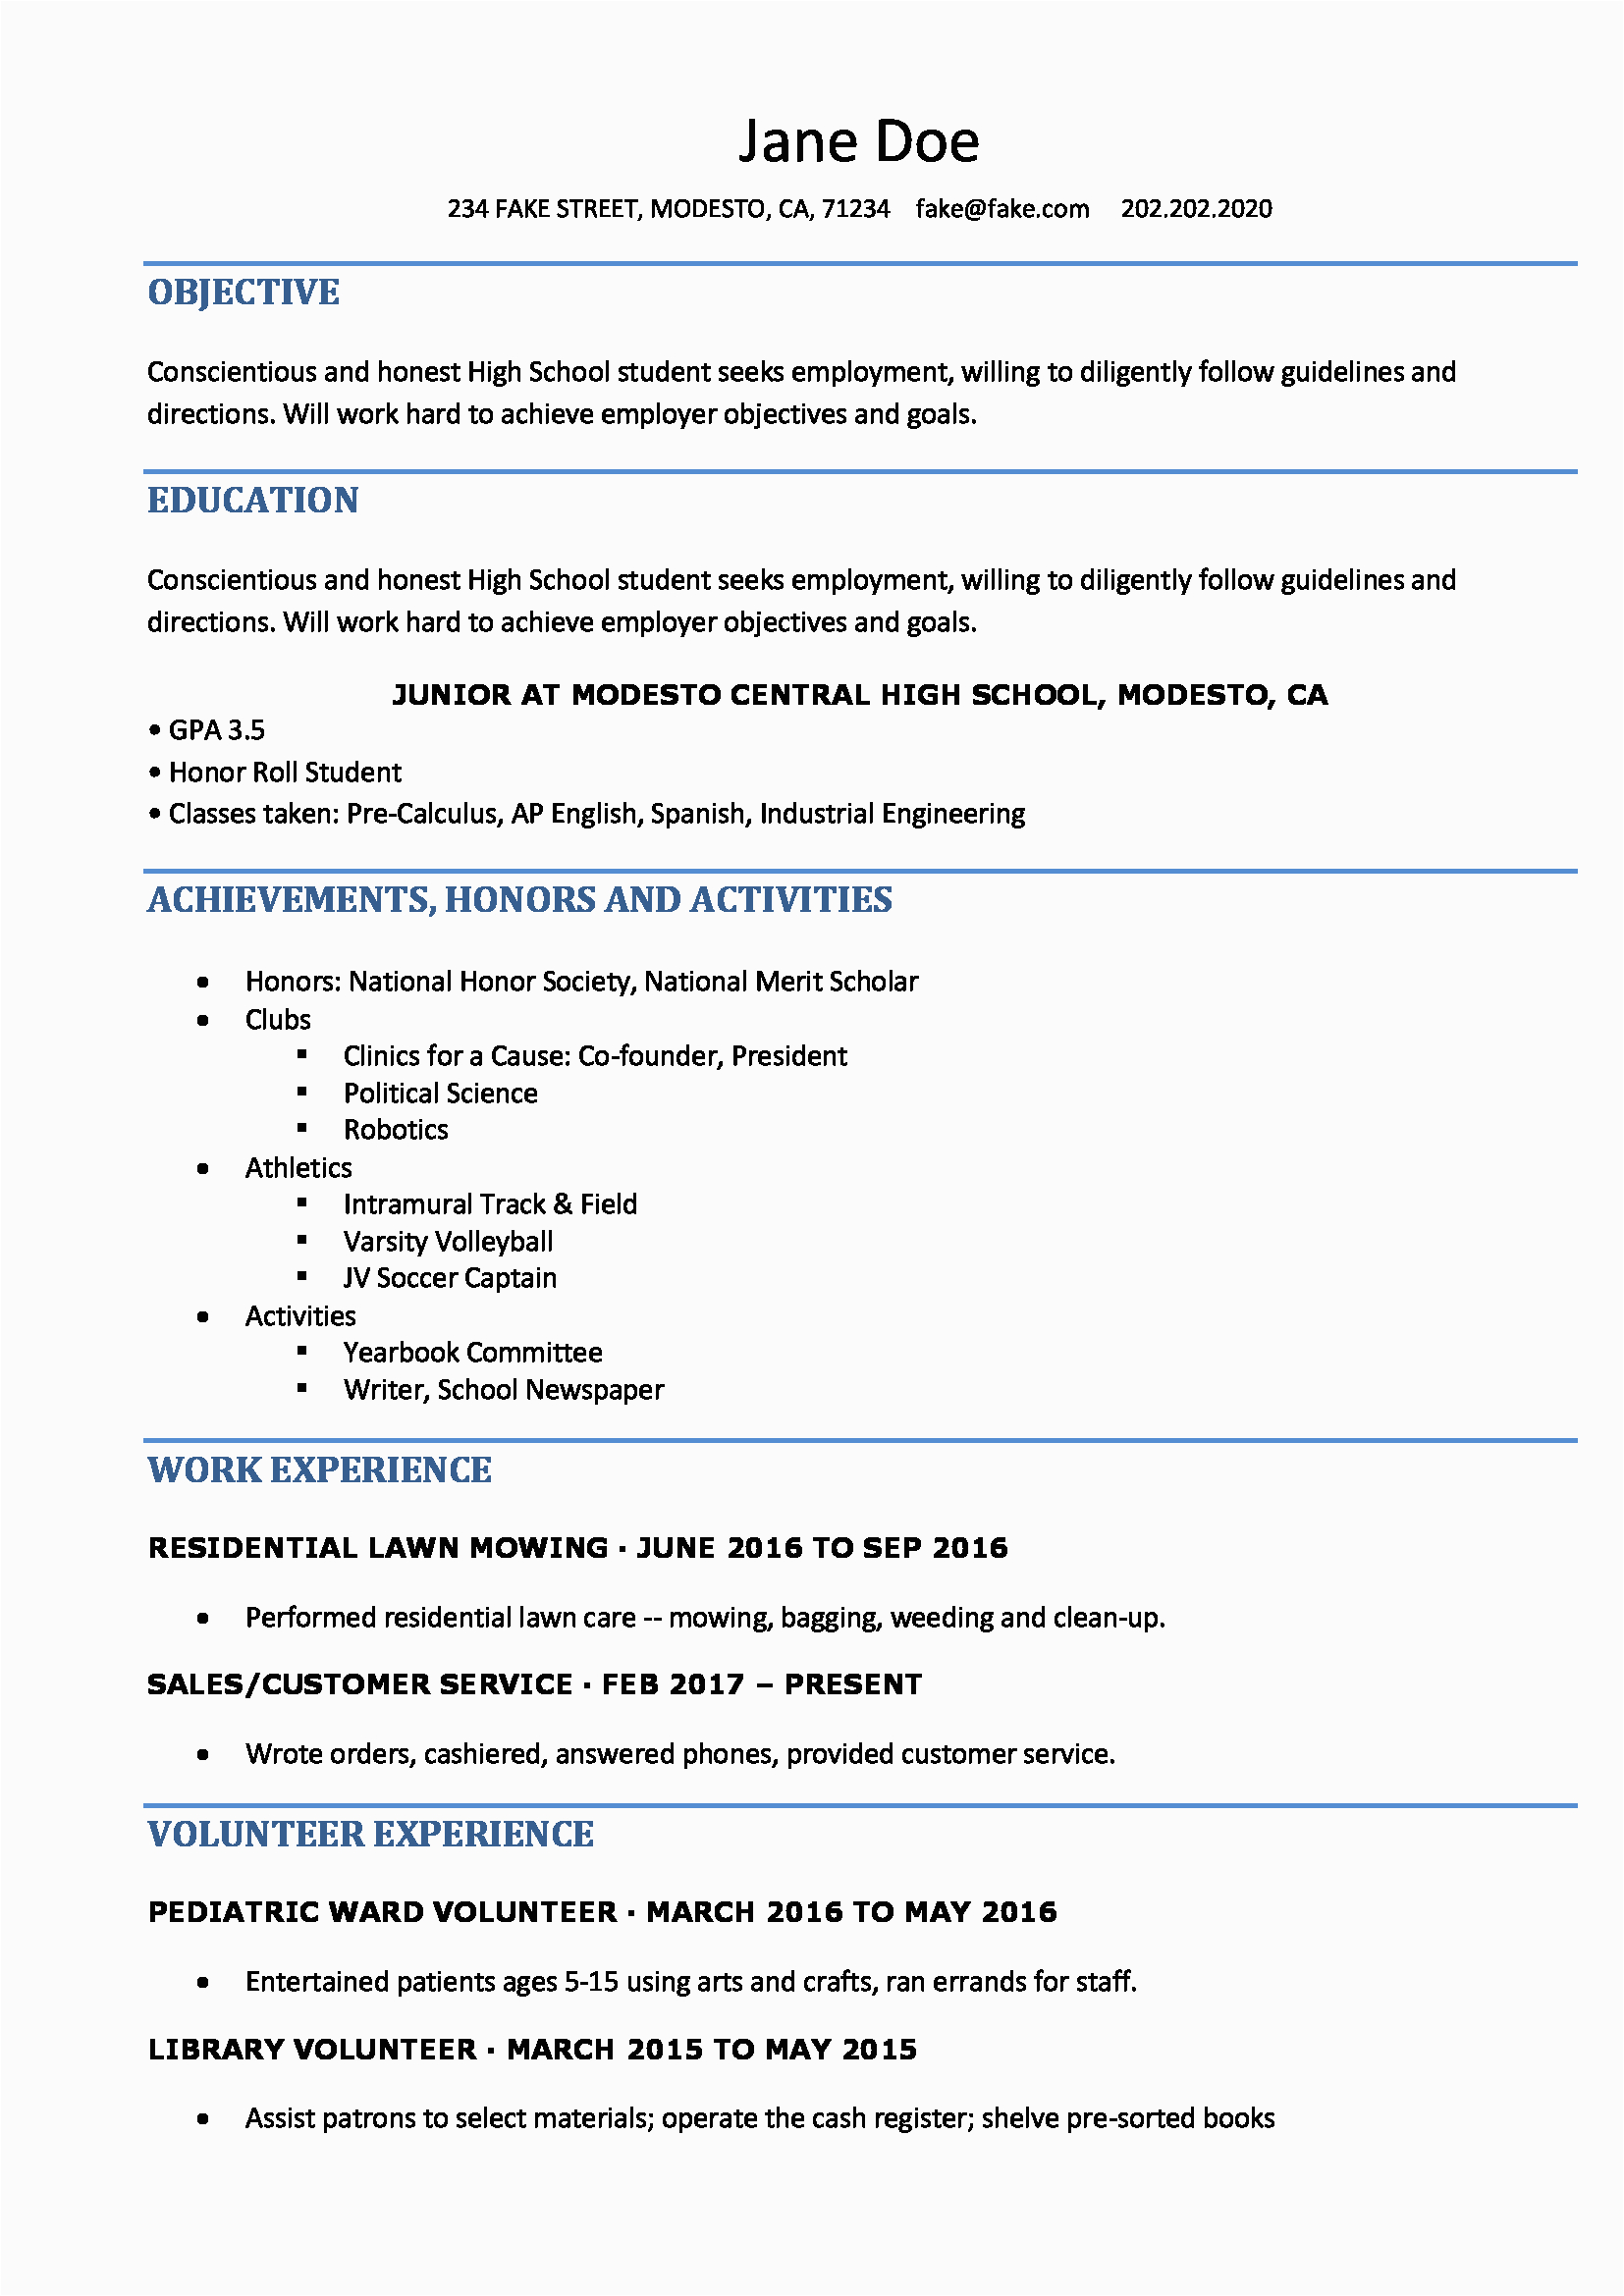 High School Student Resume Samples with Objectives High School Resume Resume Templates for High School